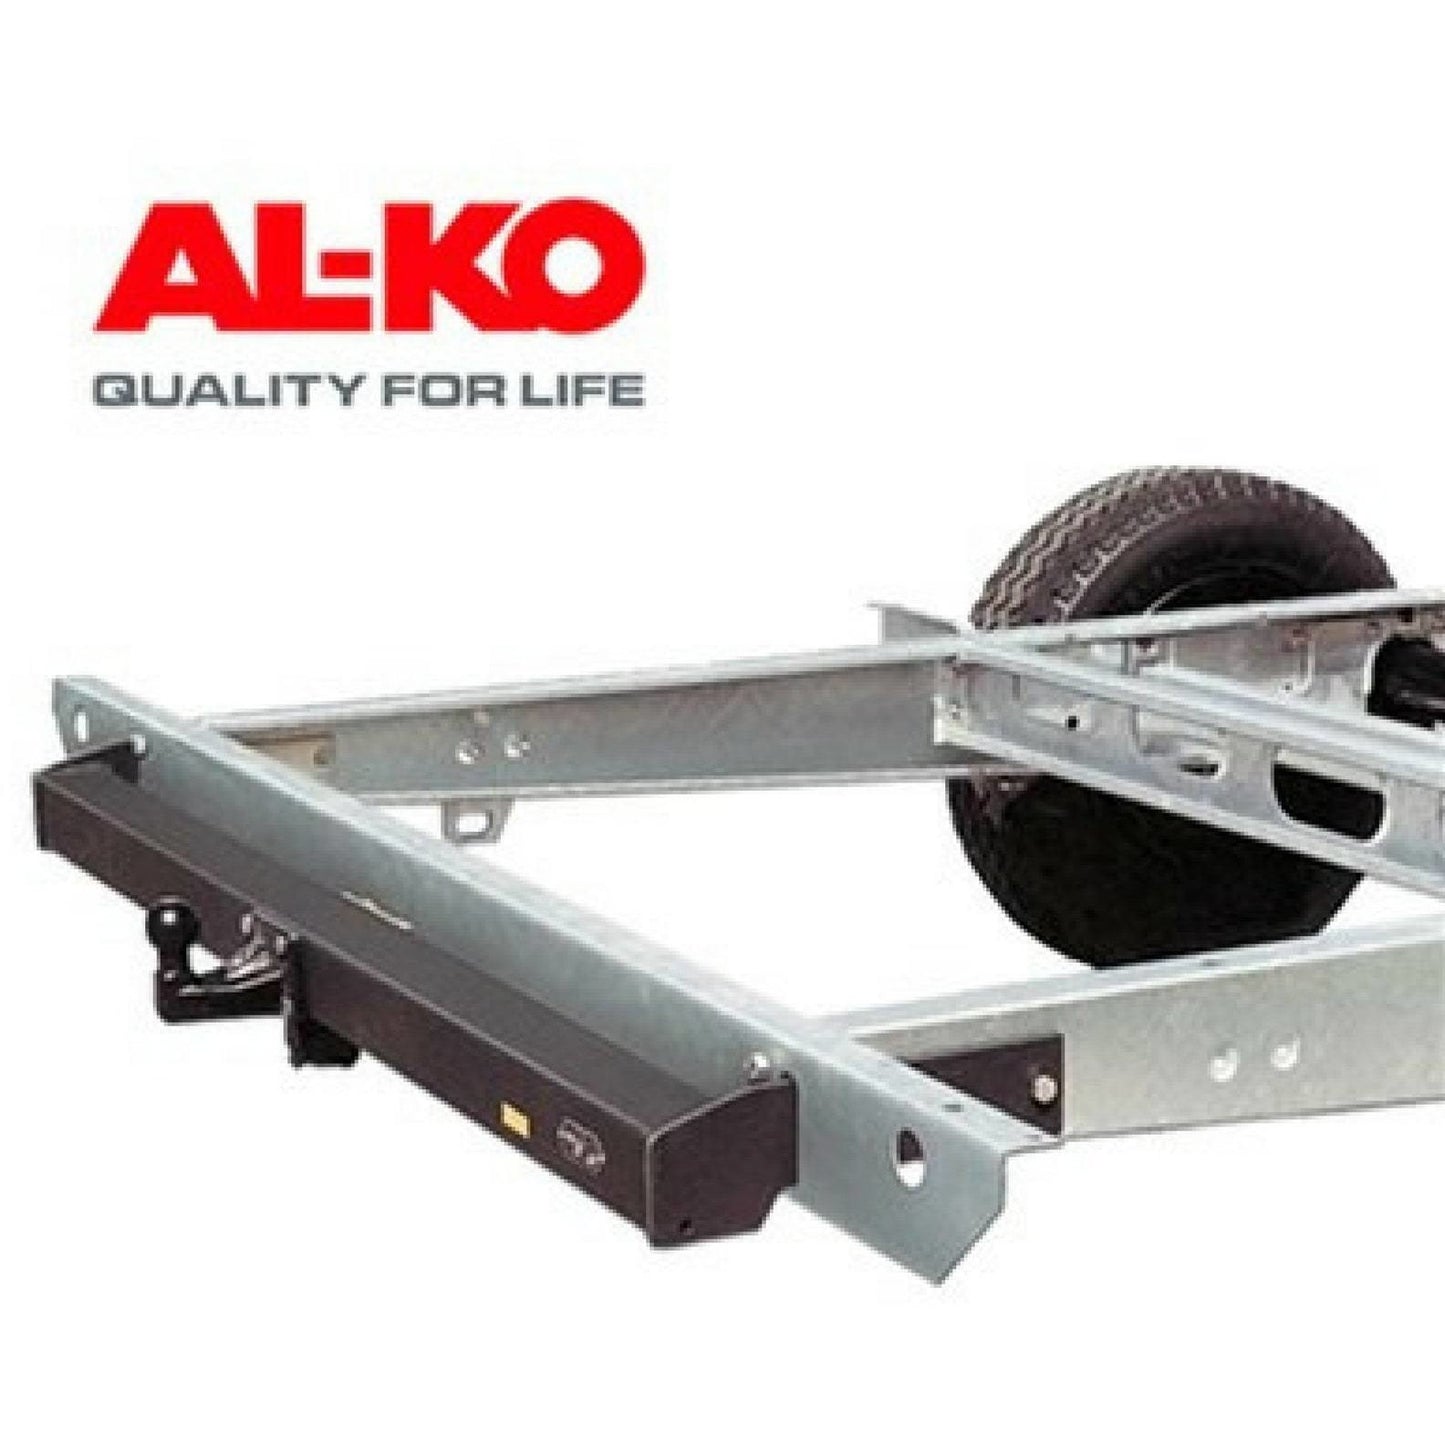 ALKO Towbar Assembly (1620361) Swift Escape made by ALKO. A Towing sold by Quality Caravan Awnings